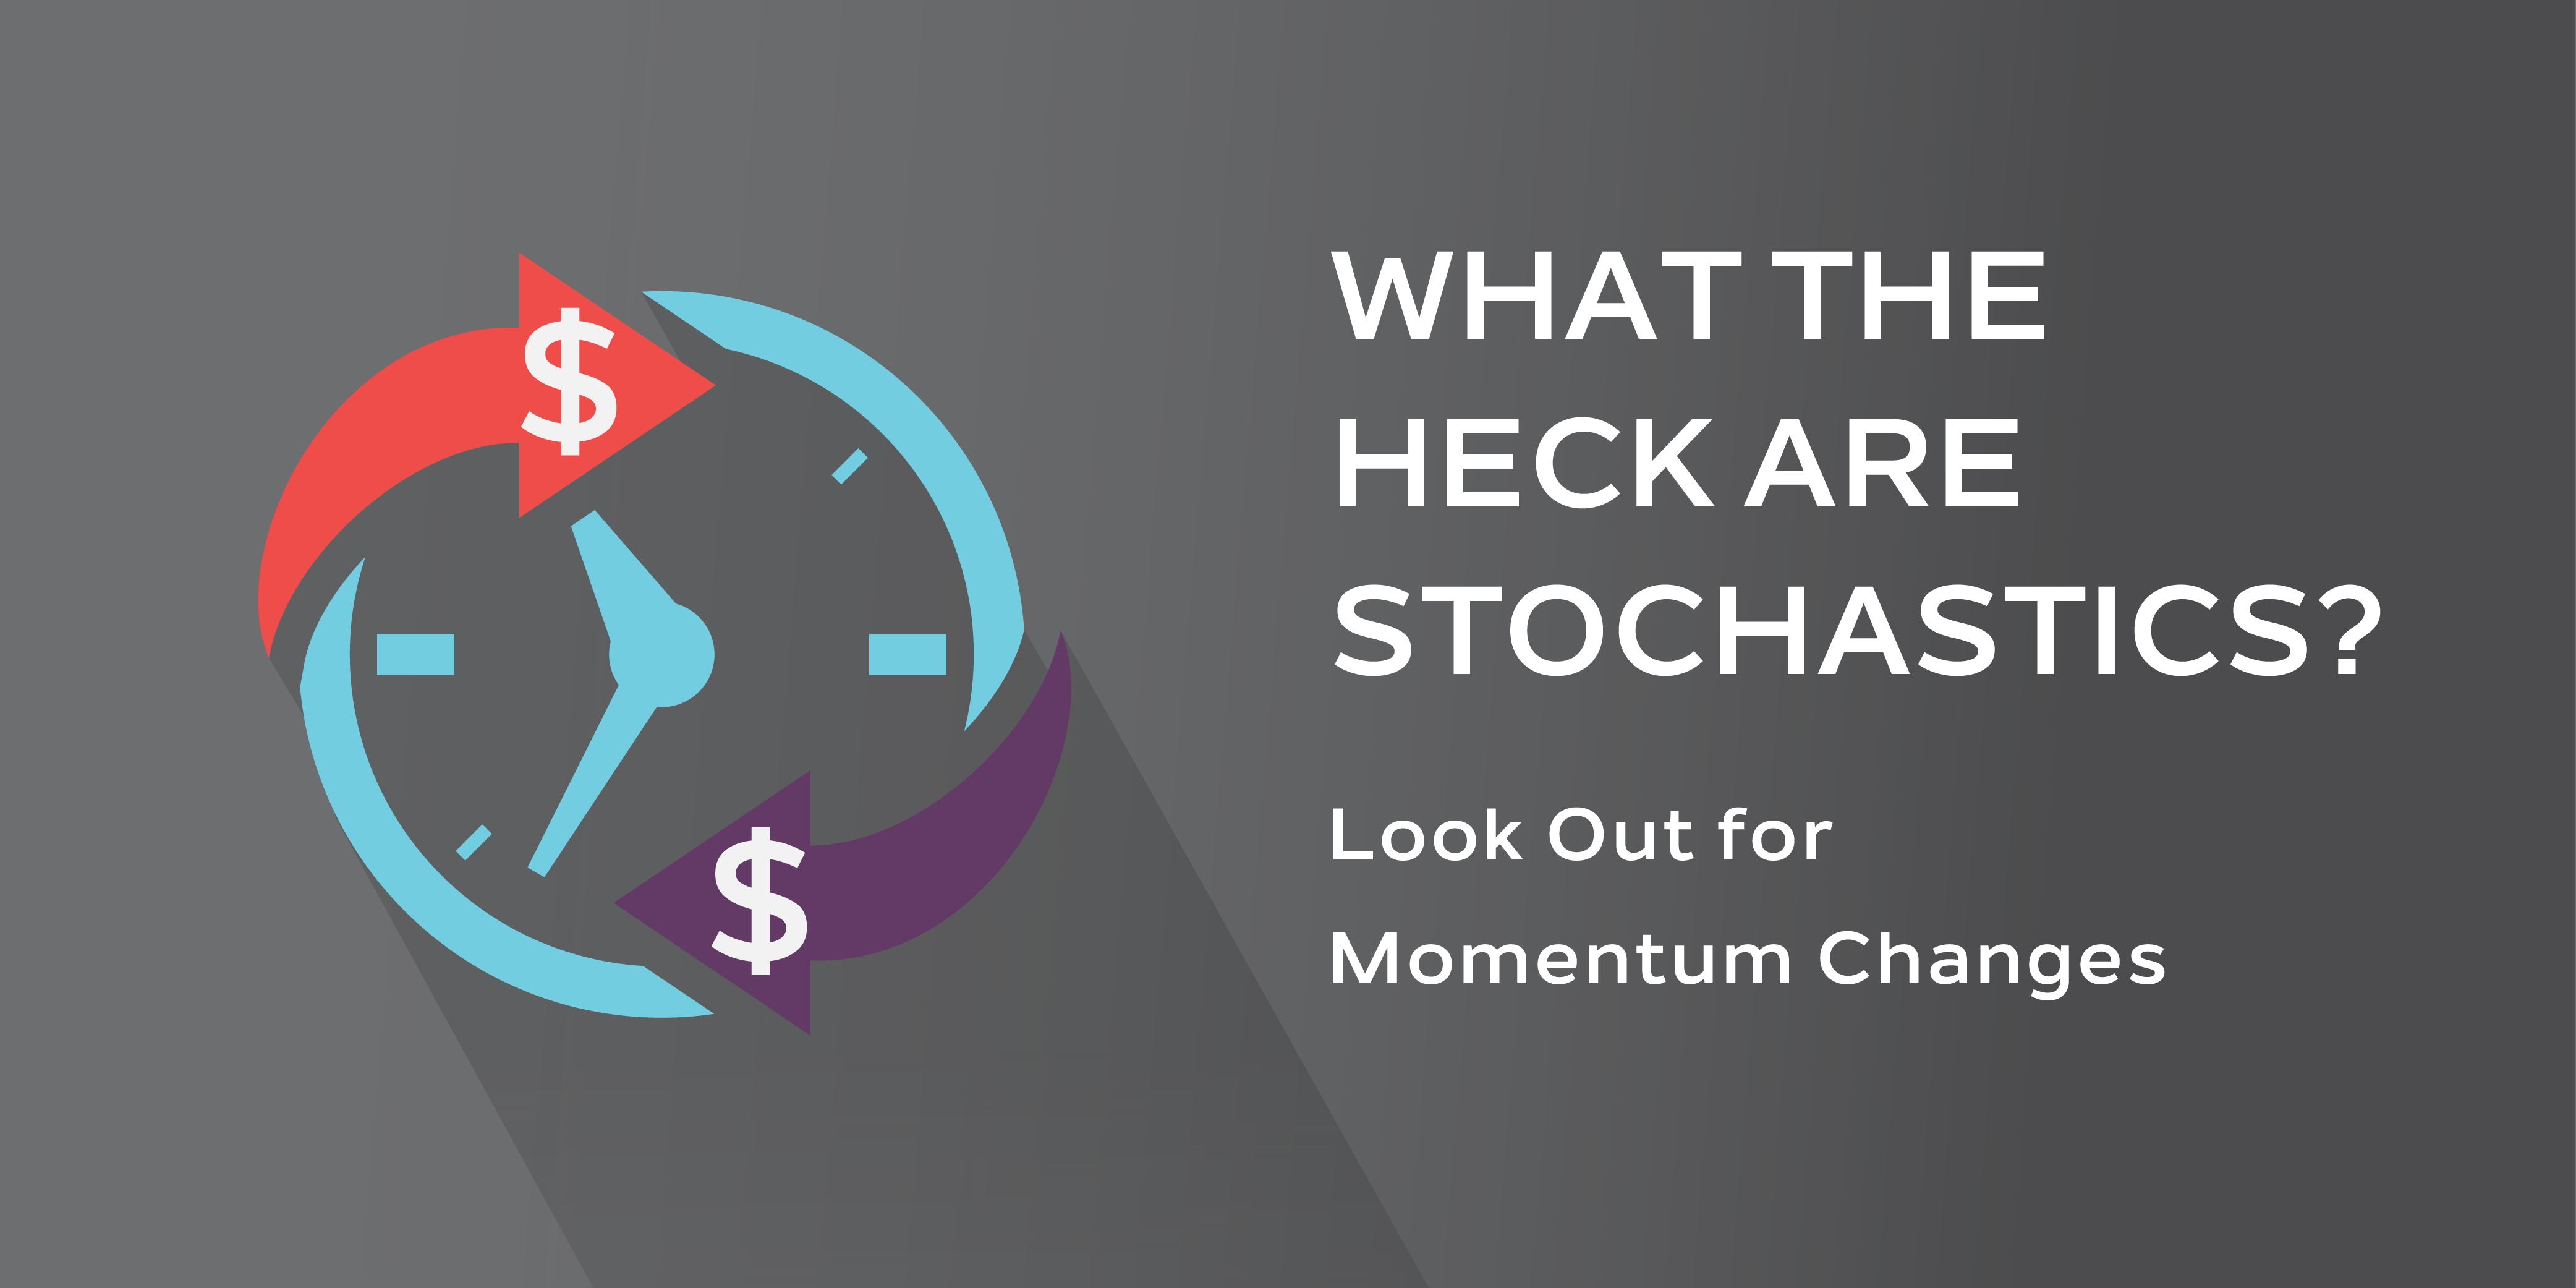 What the Heck are Stochastics?